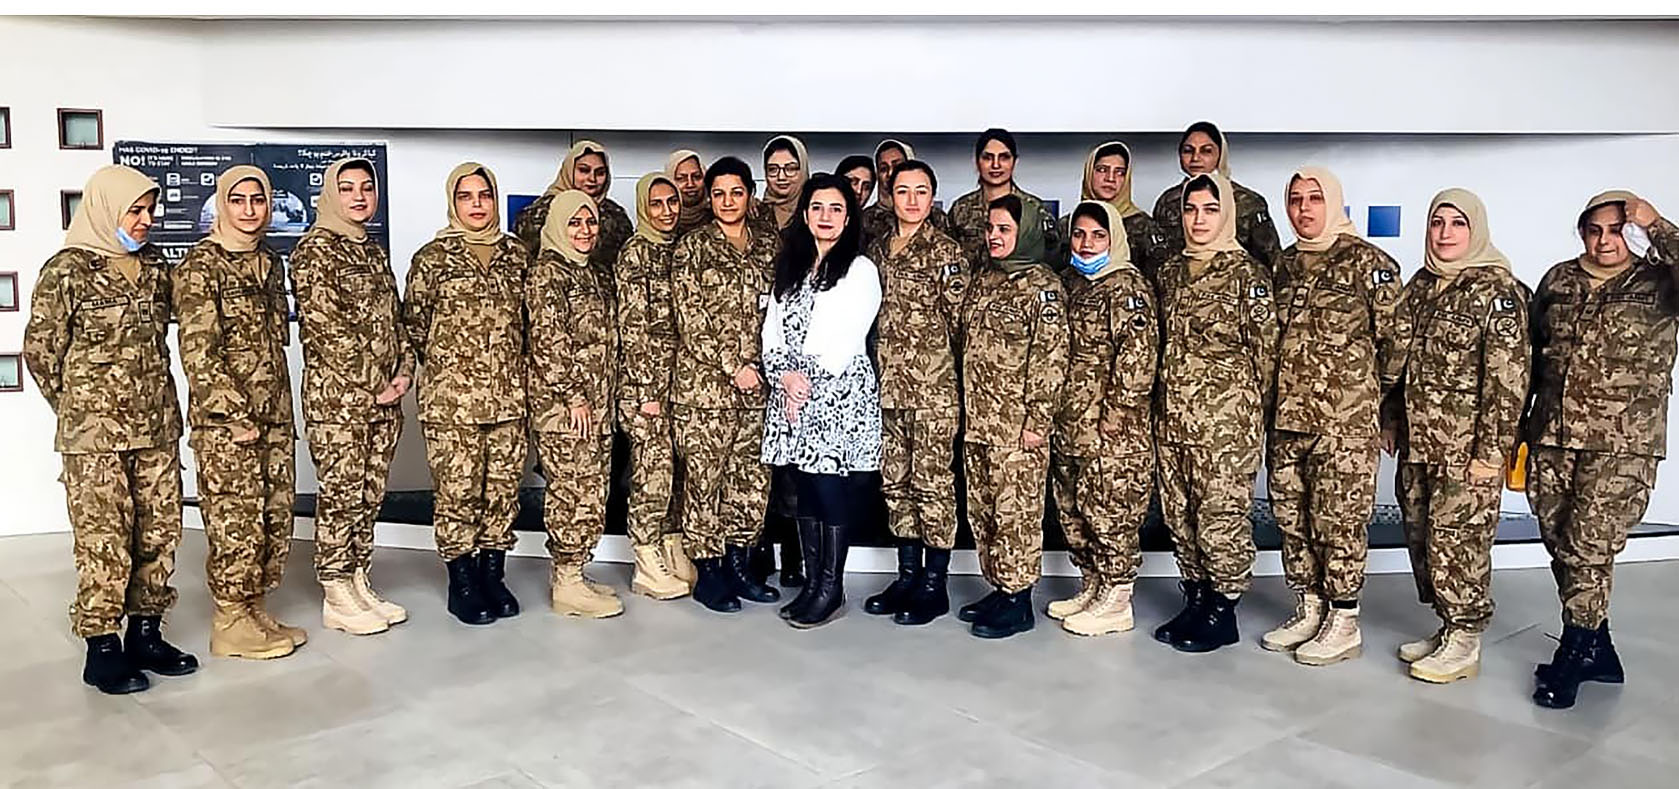 Dr. Farah Naz poses with Pakistani female peacekeepers at the National University of Sciences & Technology in Islamabad, Pakistan, on 15 December 2021. Photo: Courtesy of the University